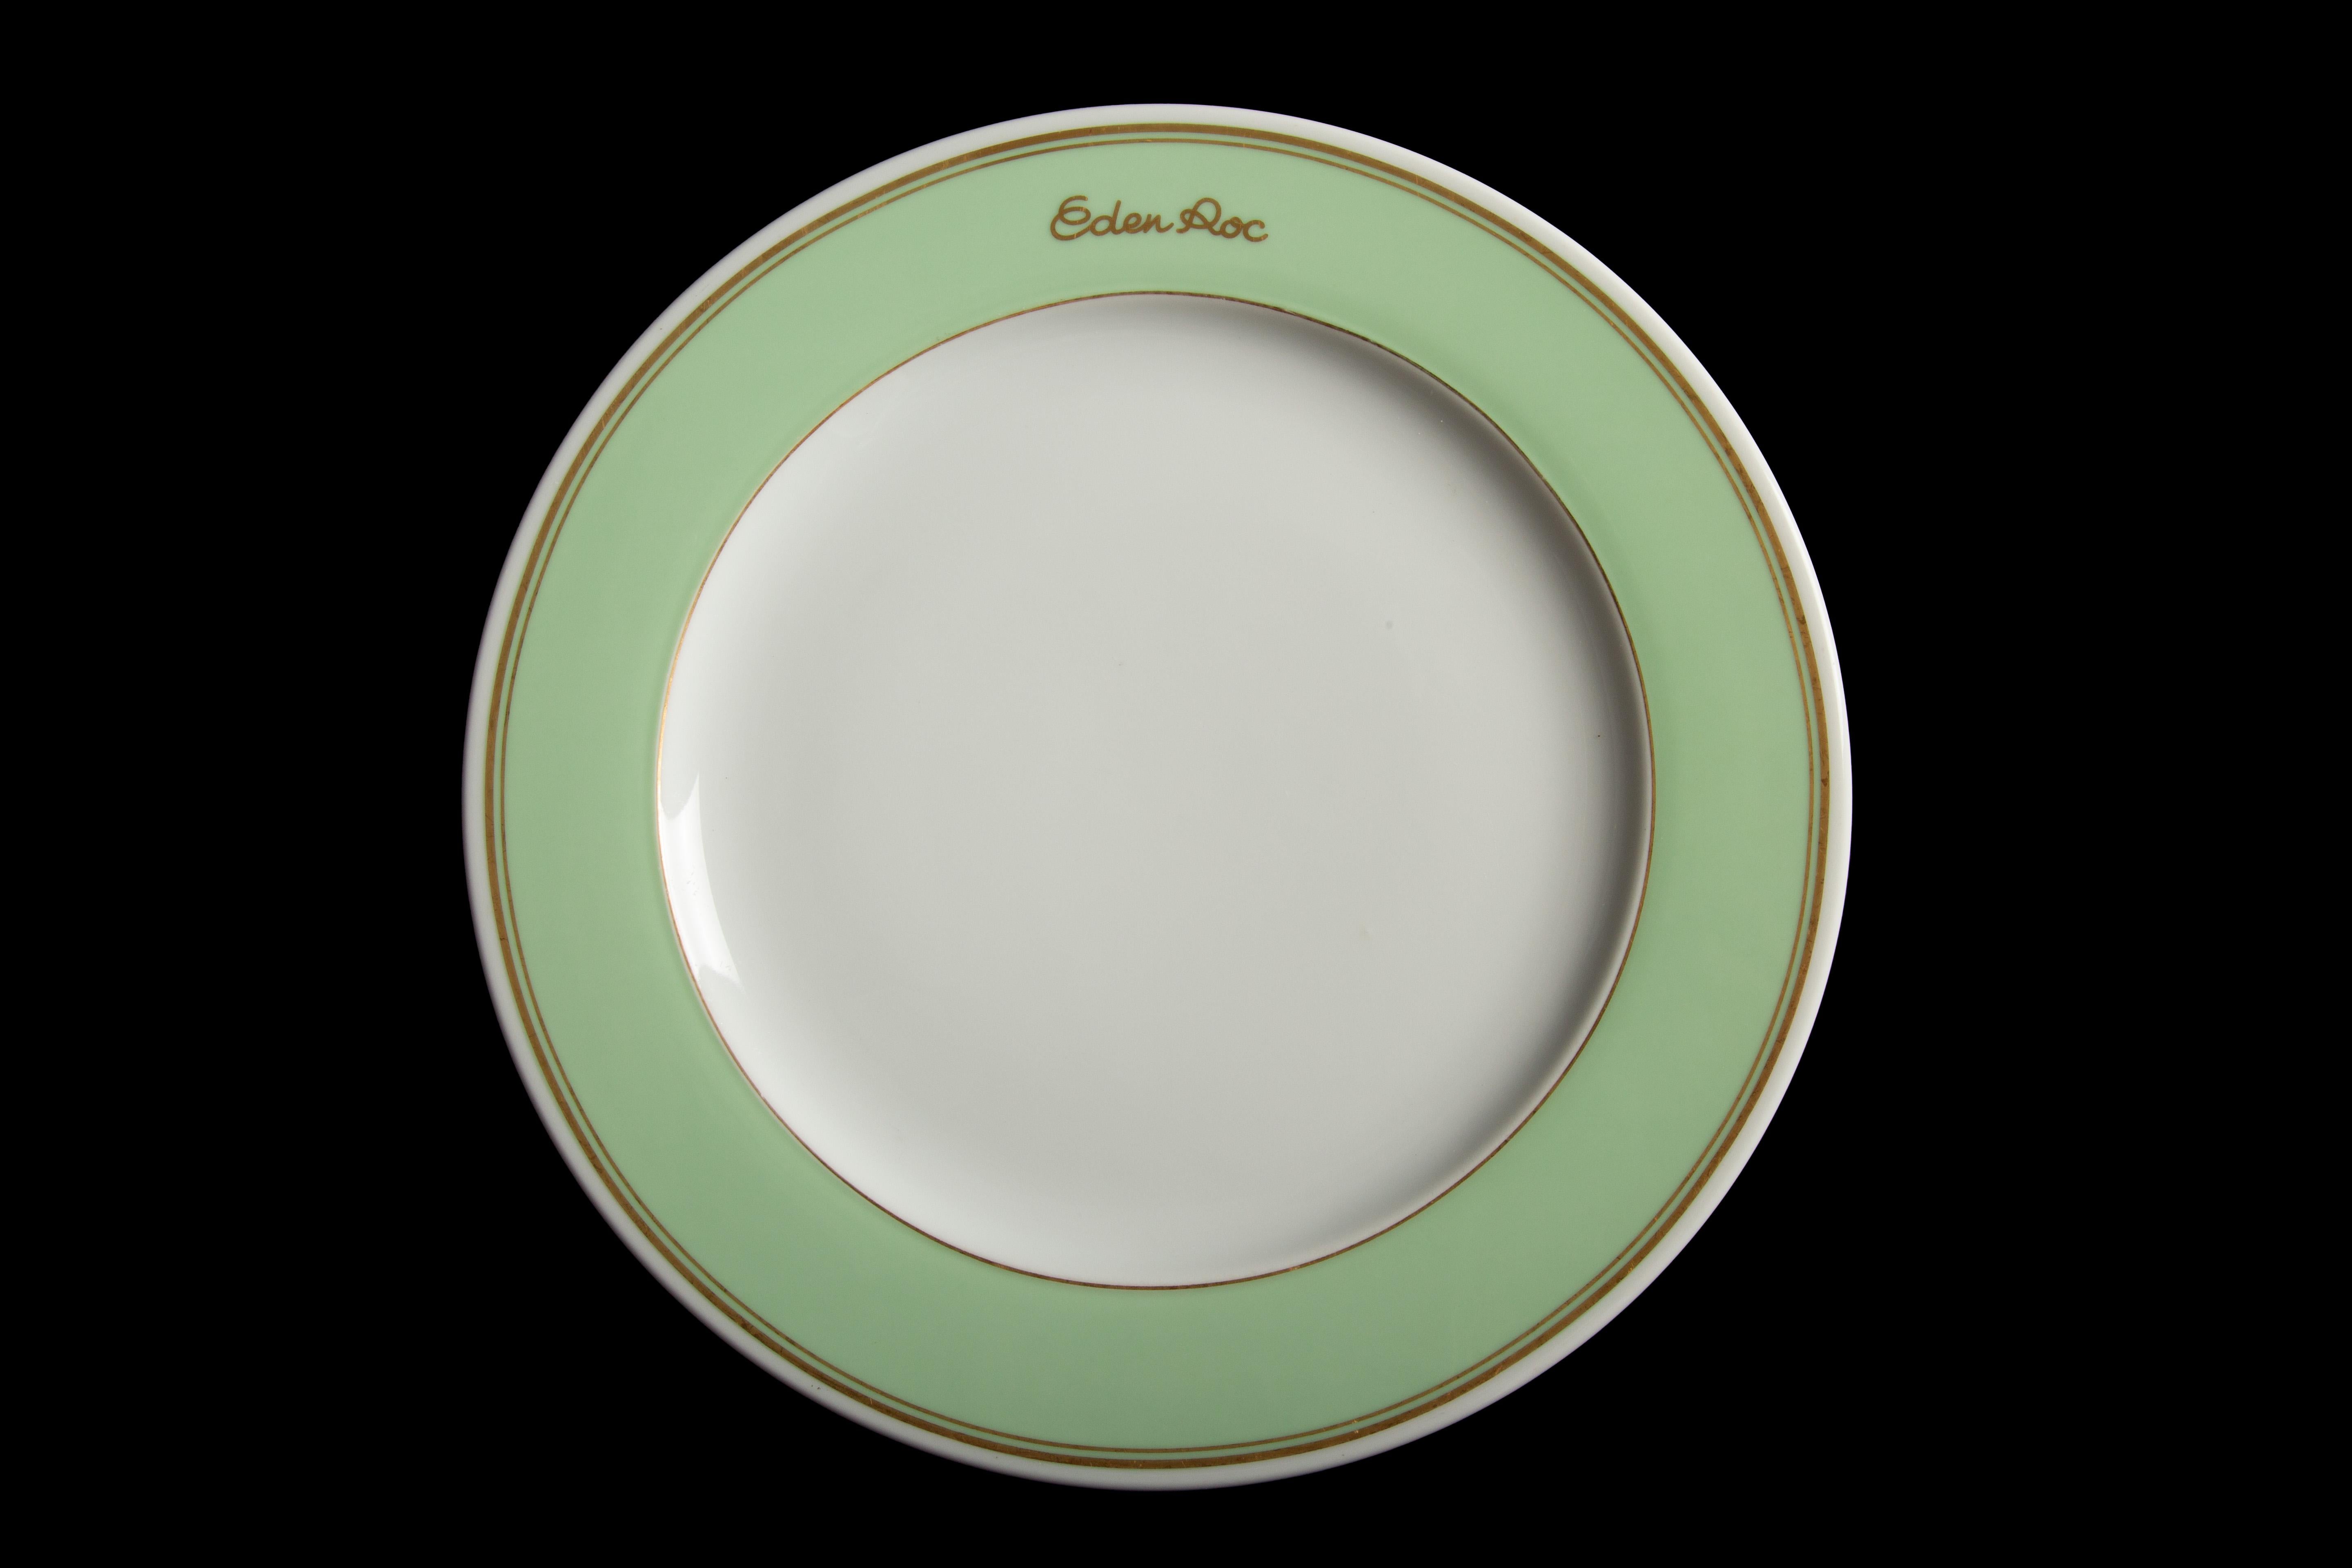 Louis XVI Hotel du Cap-Eden-Roc Charger/Dinner Plate: A Taste of Elegance and History 12